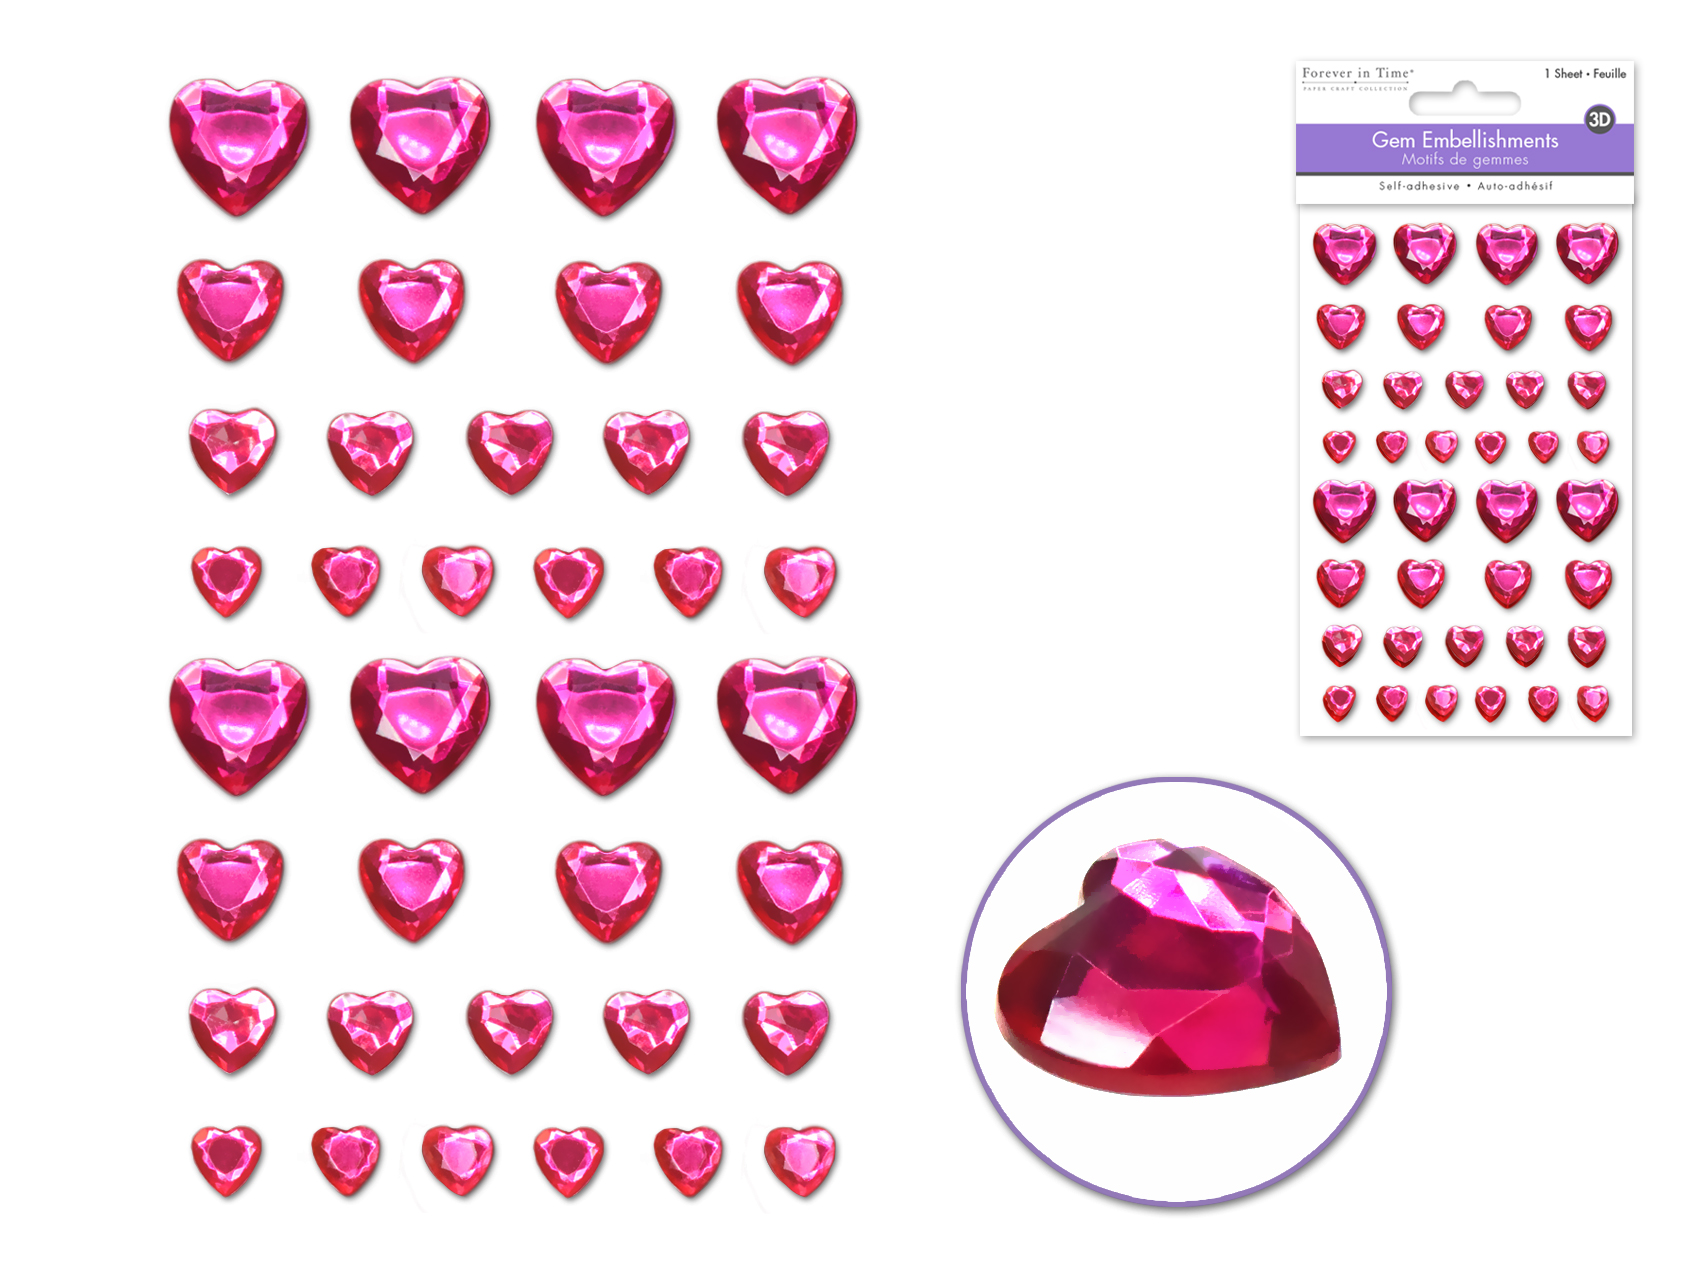 Forever In Time 3D Gem Stickers 38 pc asst - Pink Hearts